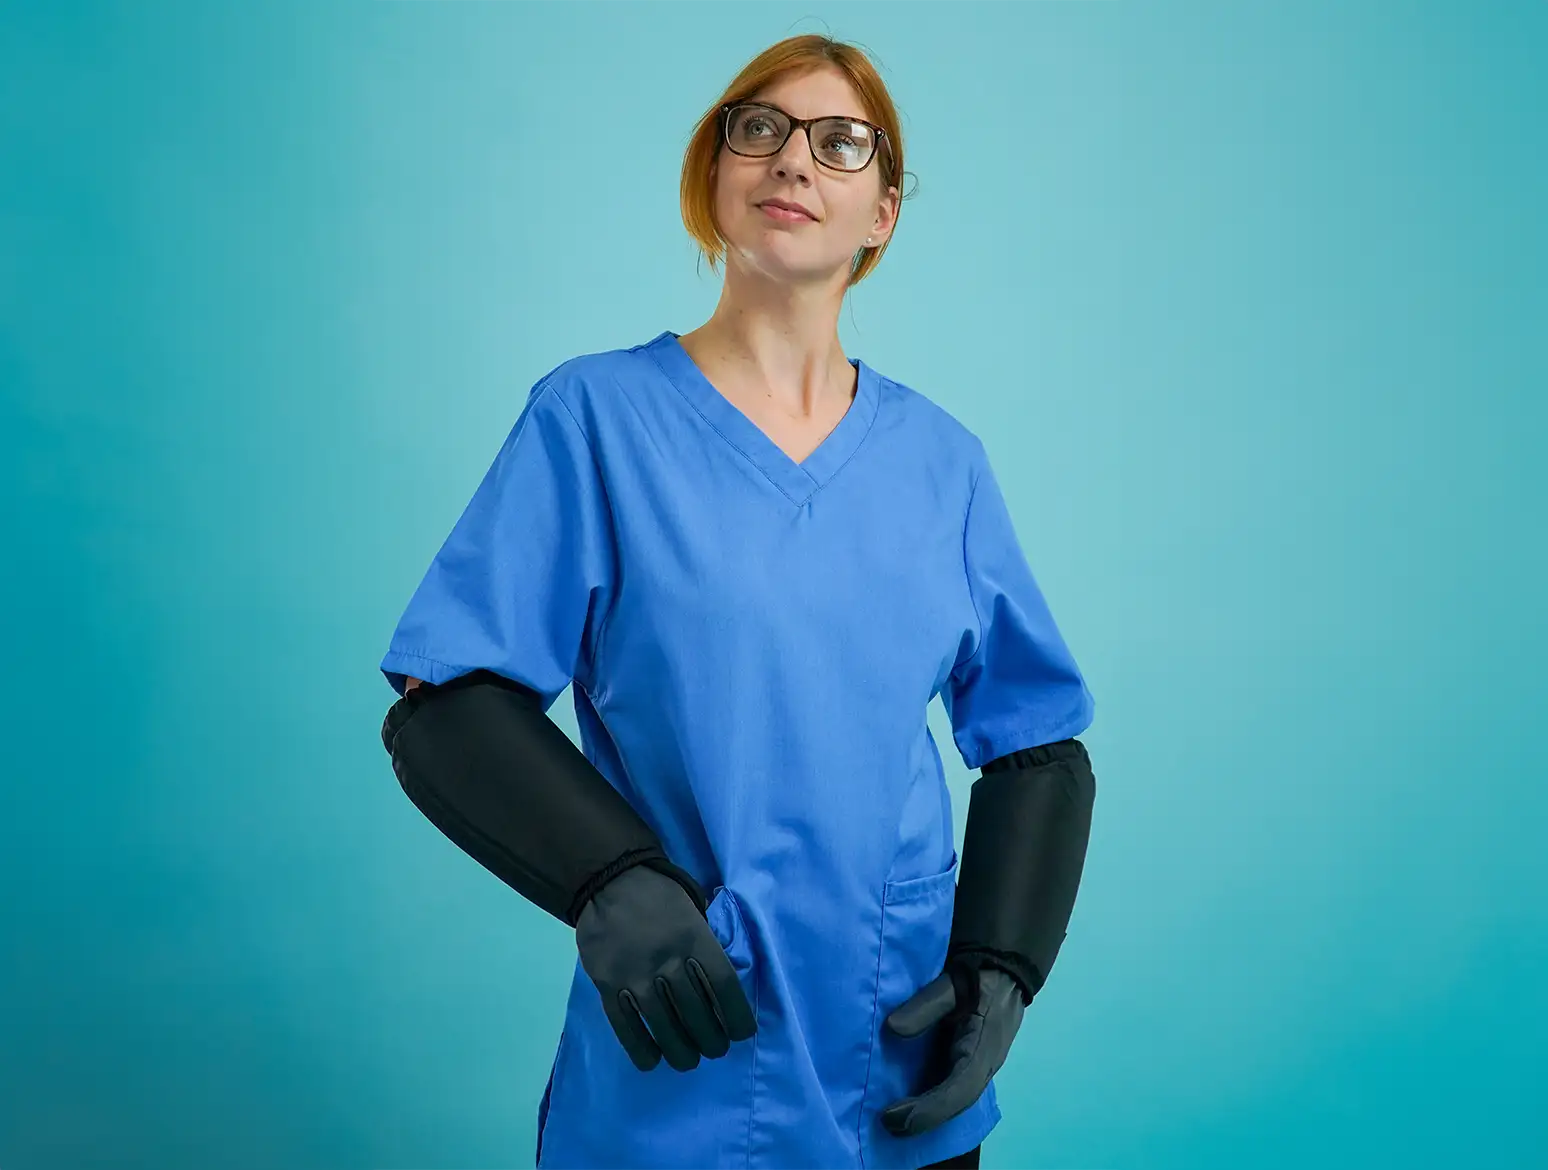 Australian nurse wearing BitePRO Version 1 arm guards with added protection and bite resistant gloves